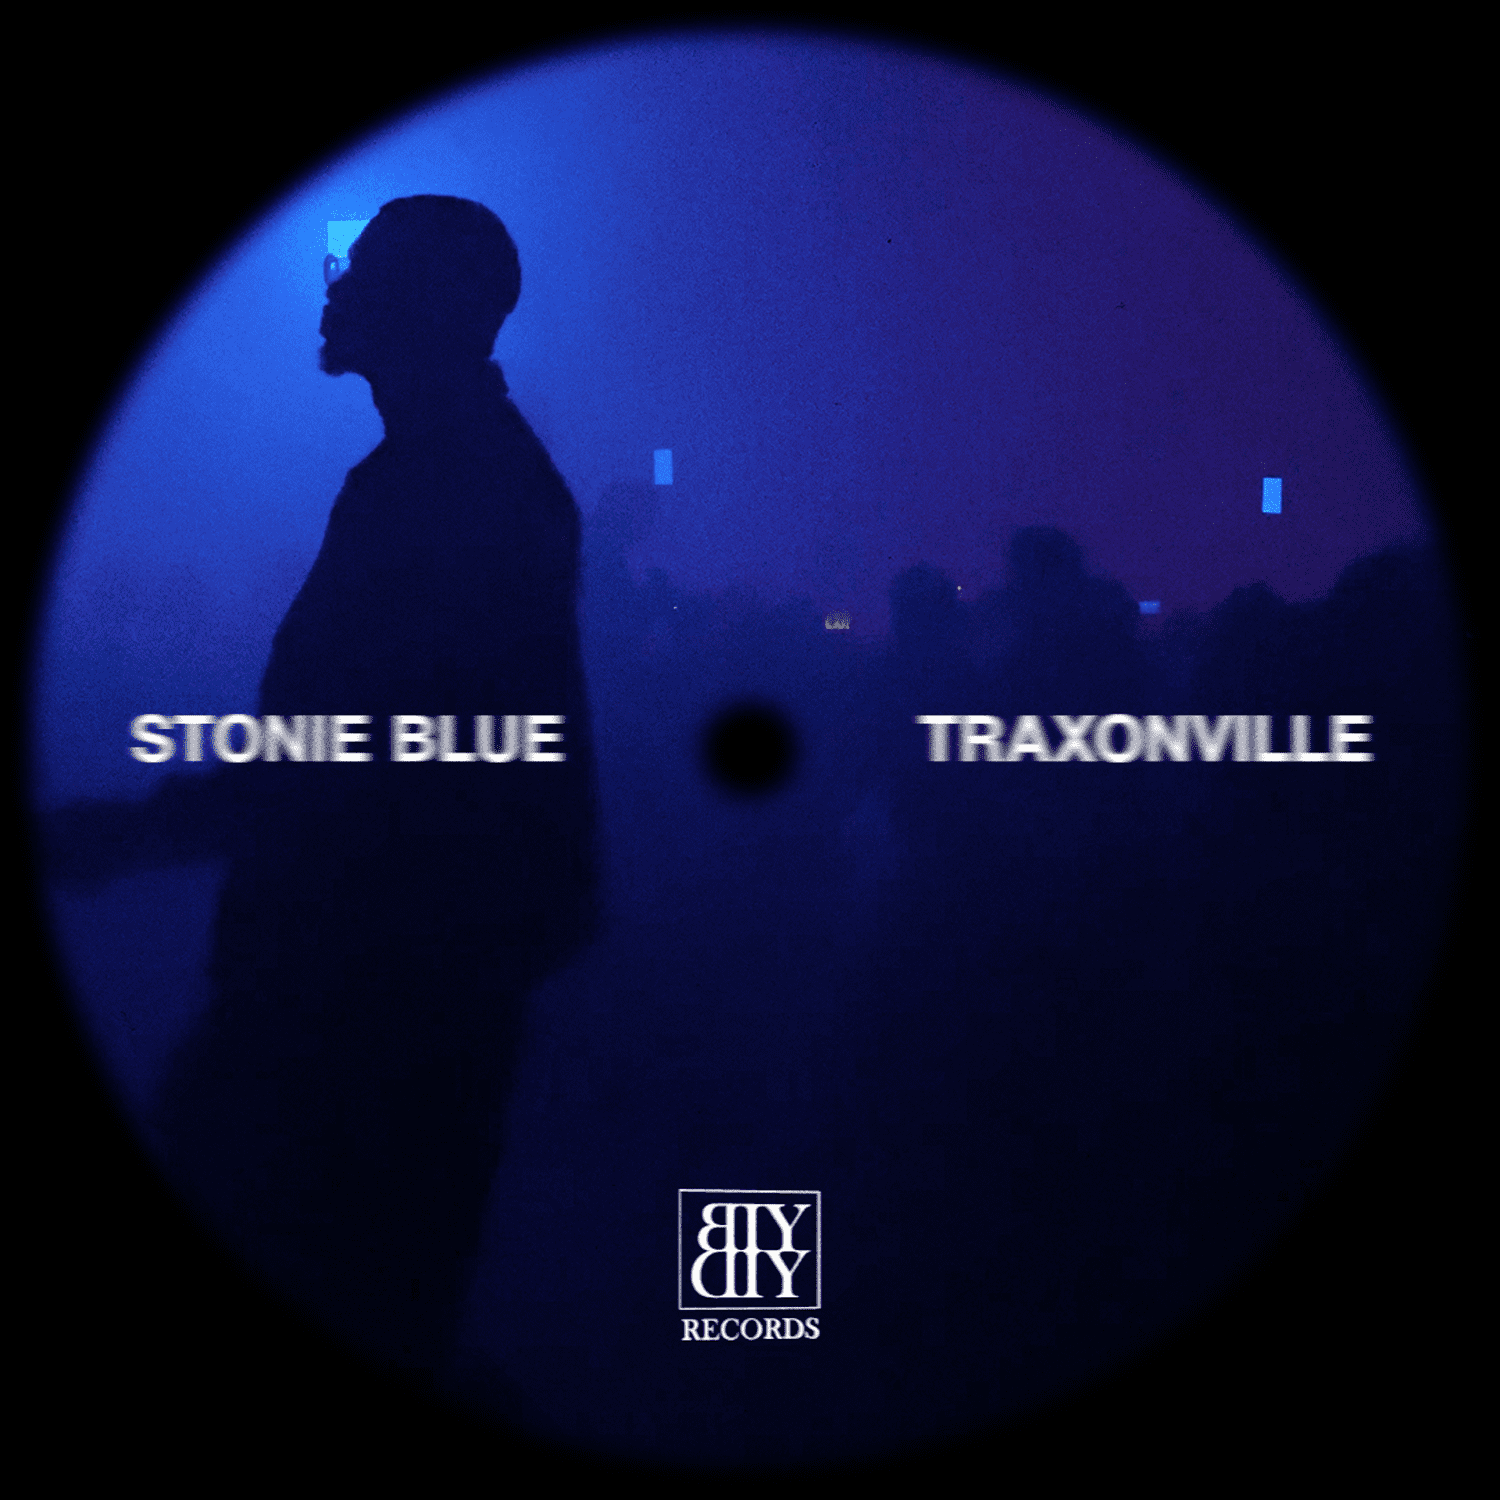 Cover art for Stonie Blue's song: TRAXONVILLE